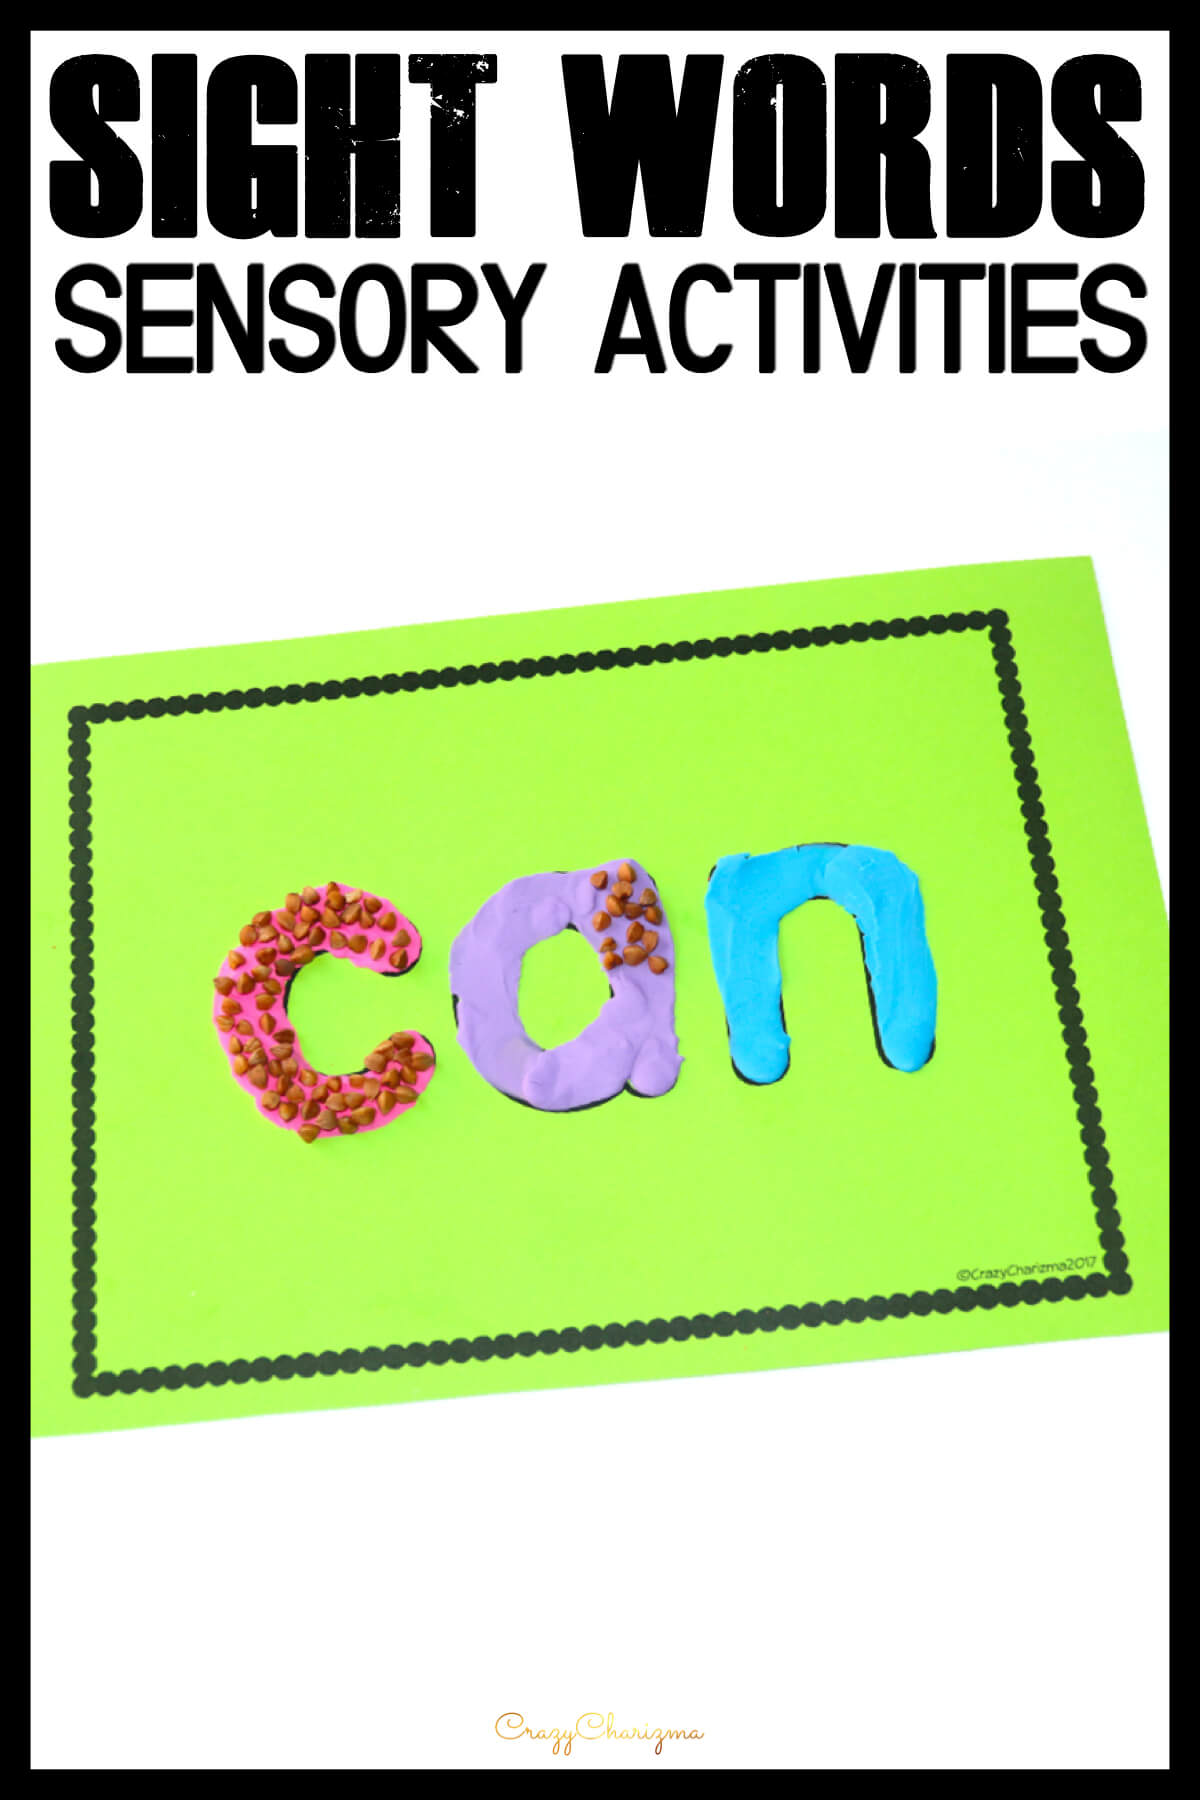 Get the ultimate list to teach SIGHT WORDS with fun sight word games and worksheets! Use technology and apps. Explore sensory activities. Enjoy reading games and writing practice!